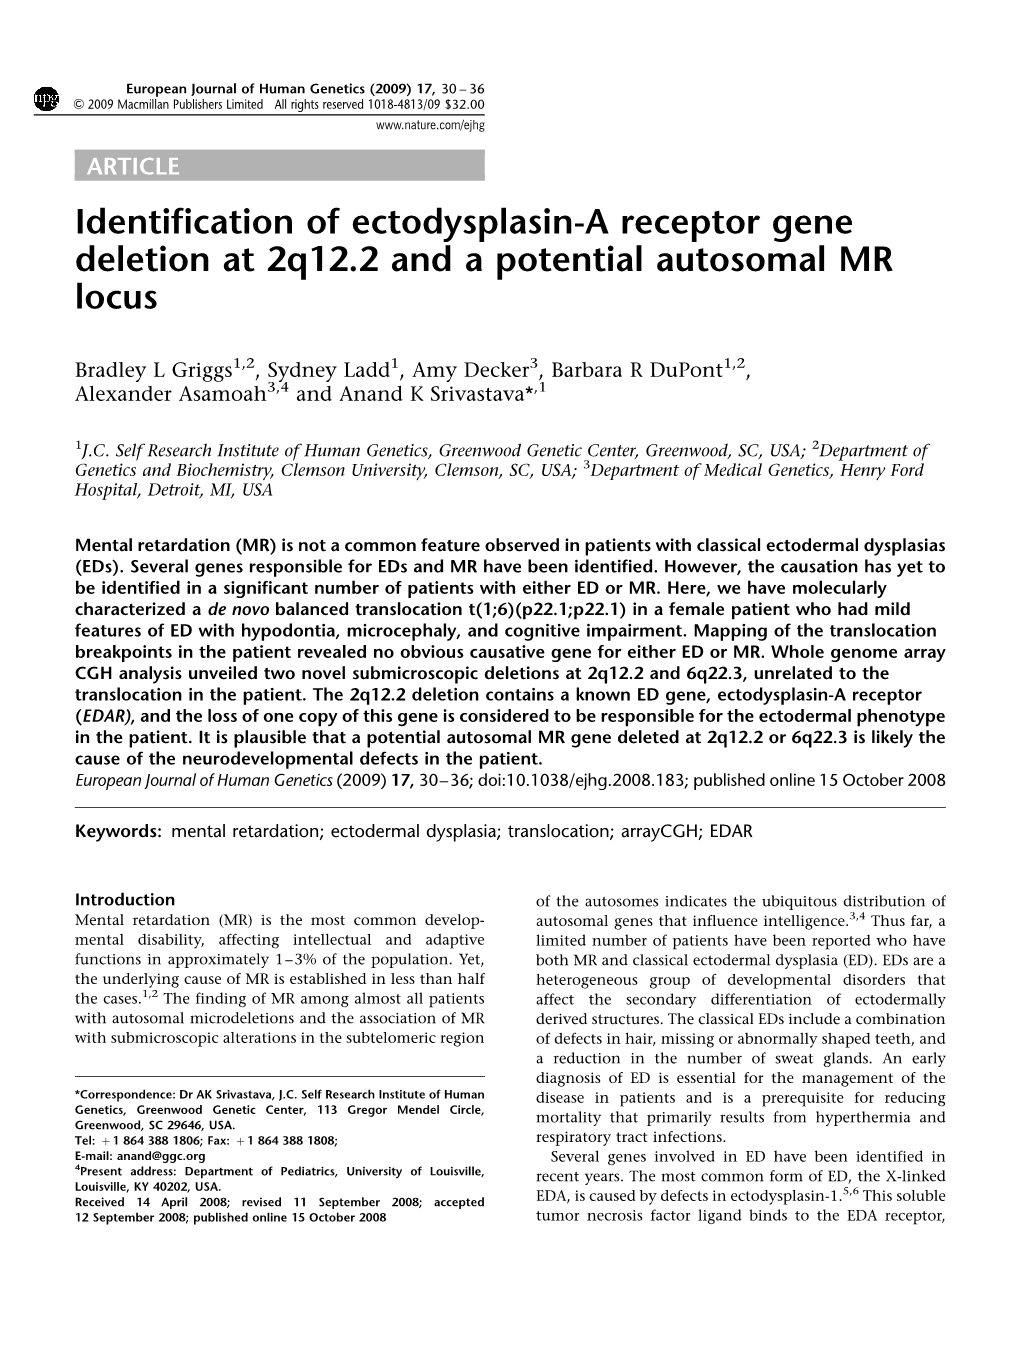 Identification of Ectodysplasin-A Receptor Gene Deletion at 2Q12.2 and a Potential Autosomal MR Locus